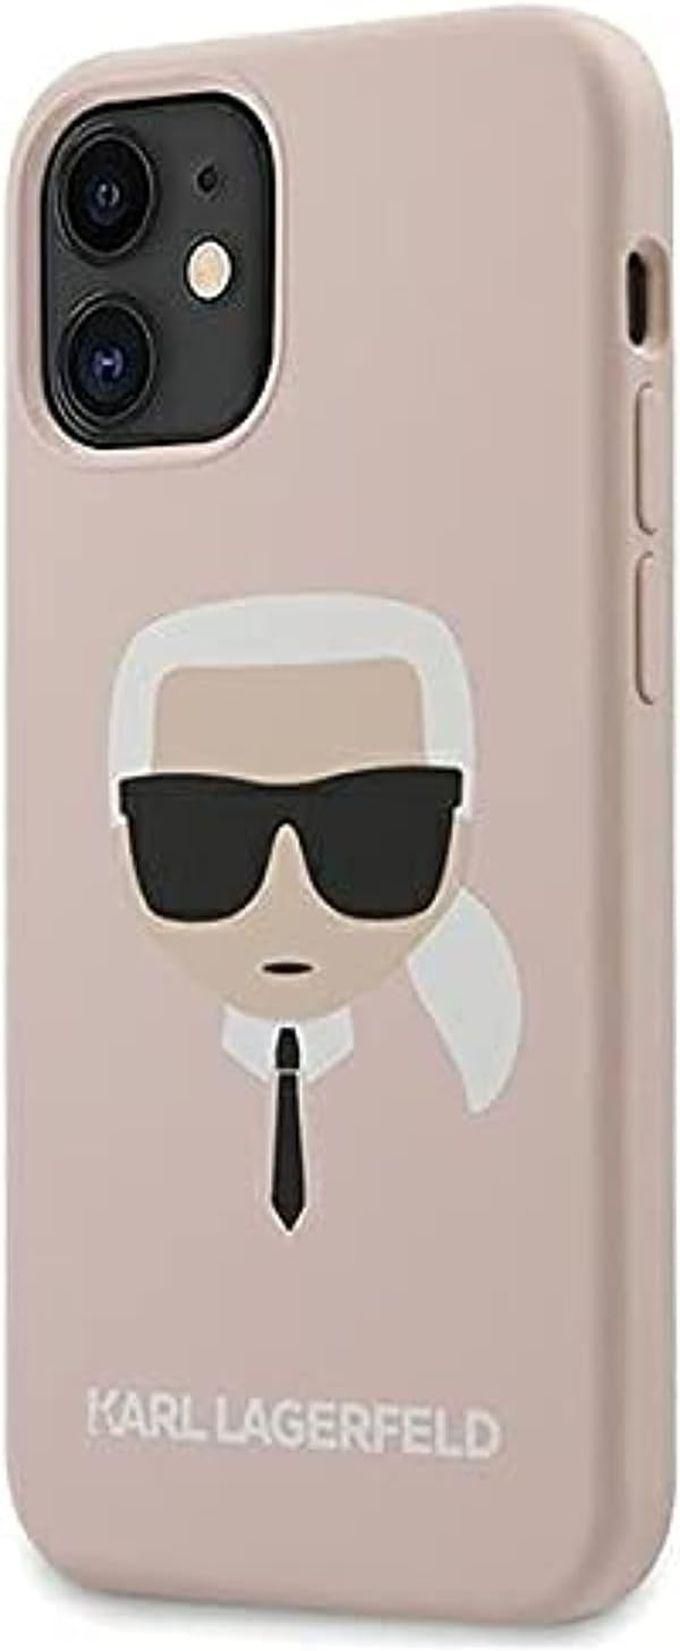 Karl Lagerfeld Head Silicone Case iPhone 12 MINI - Light Pink